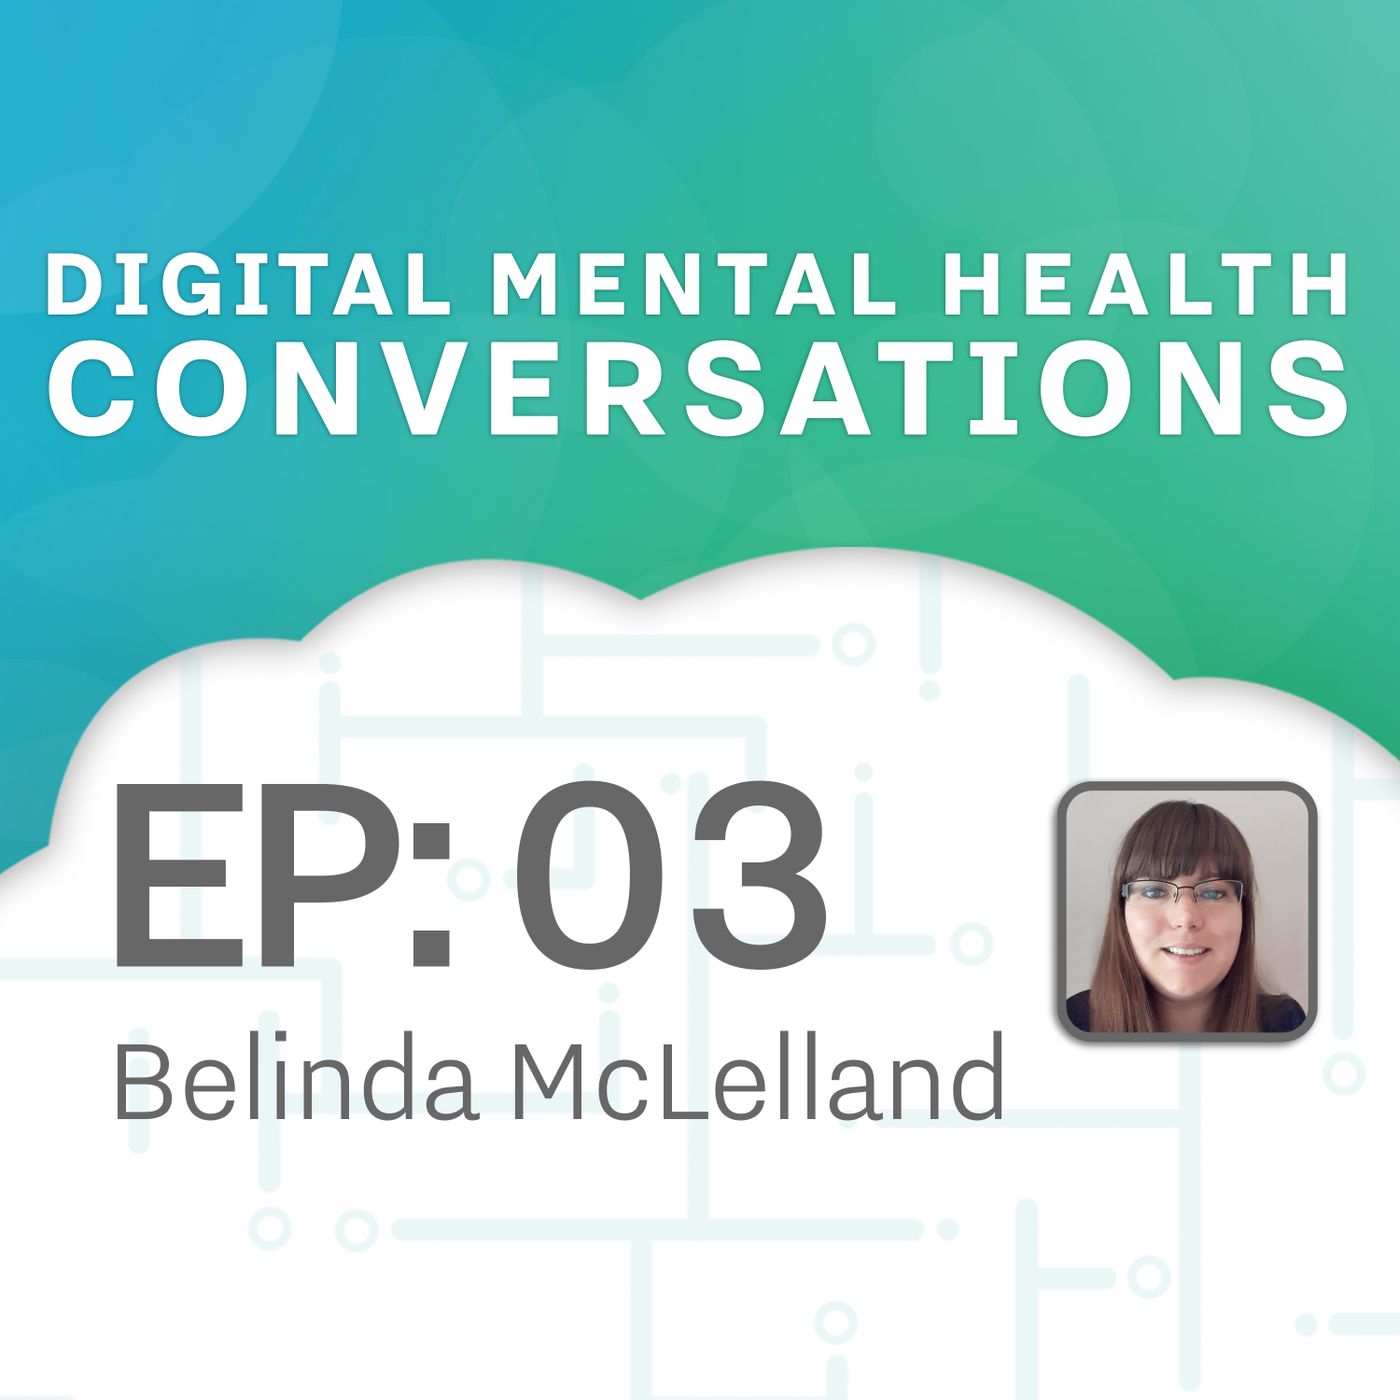 EP03 Digital mental health for young people